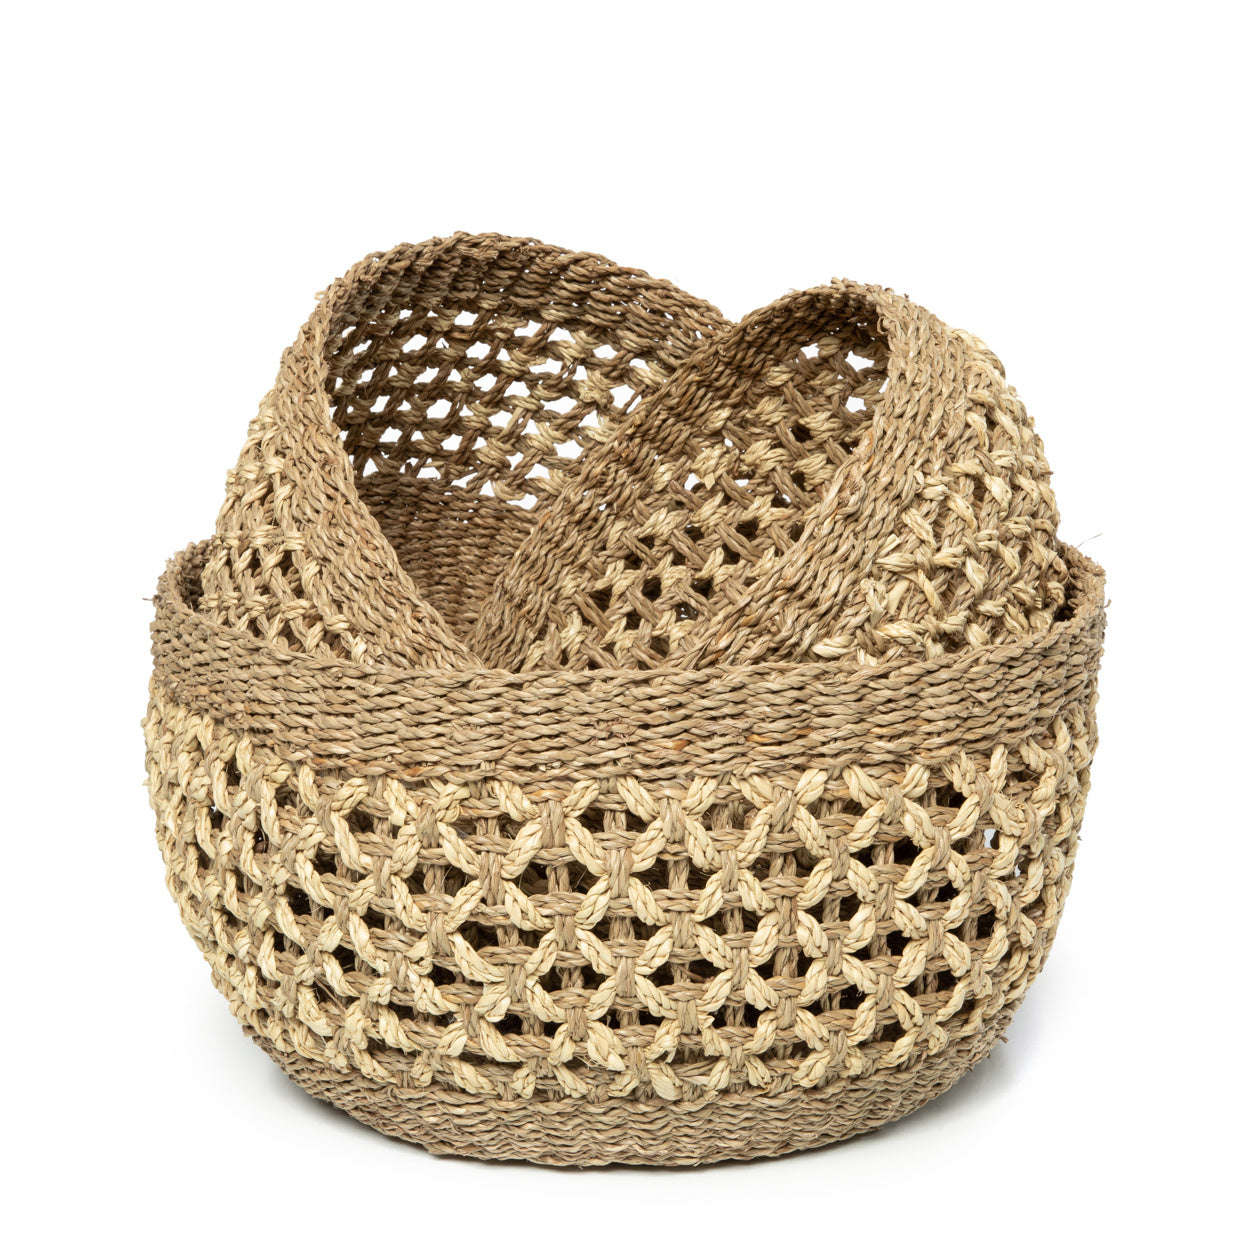 THE PHU QUOC Baskets Set of 3 folded front view